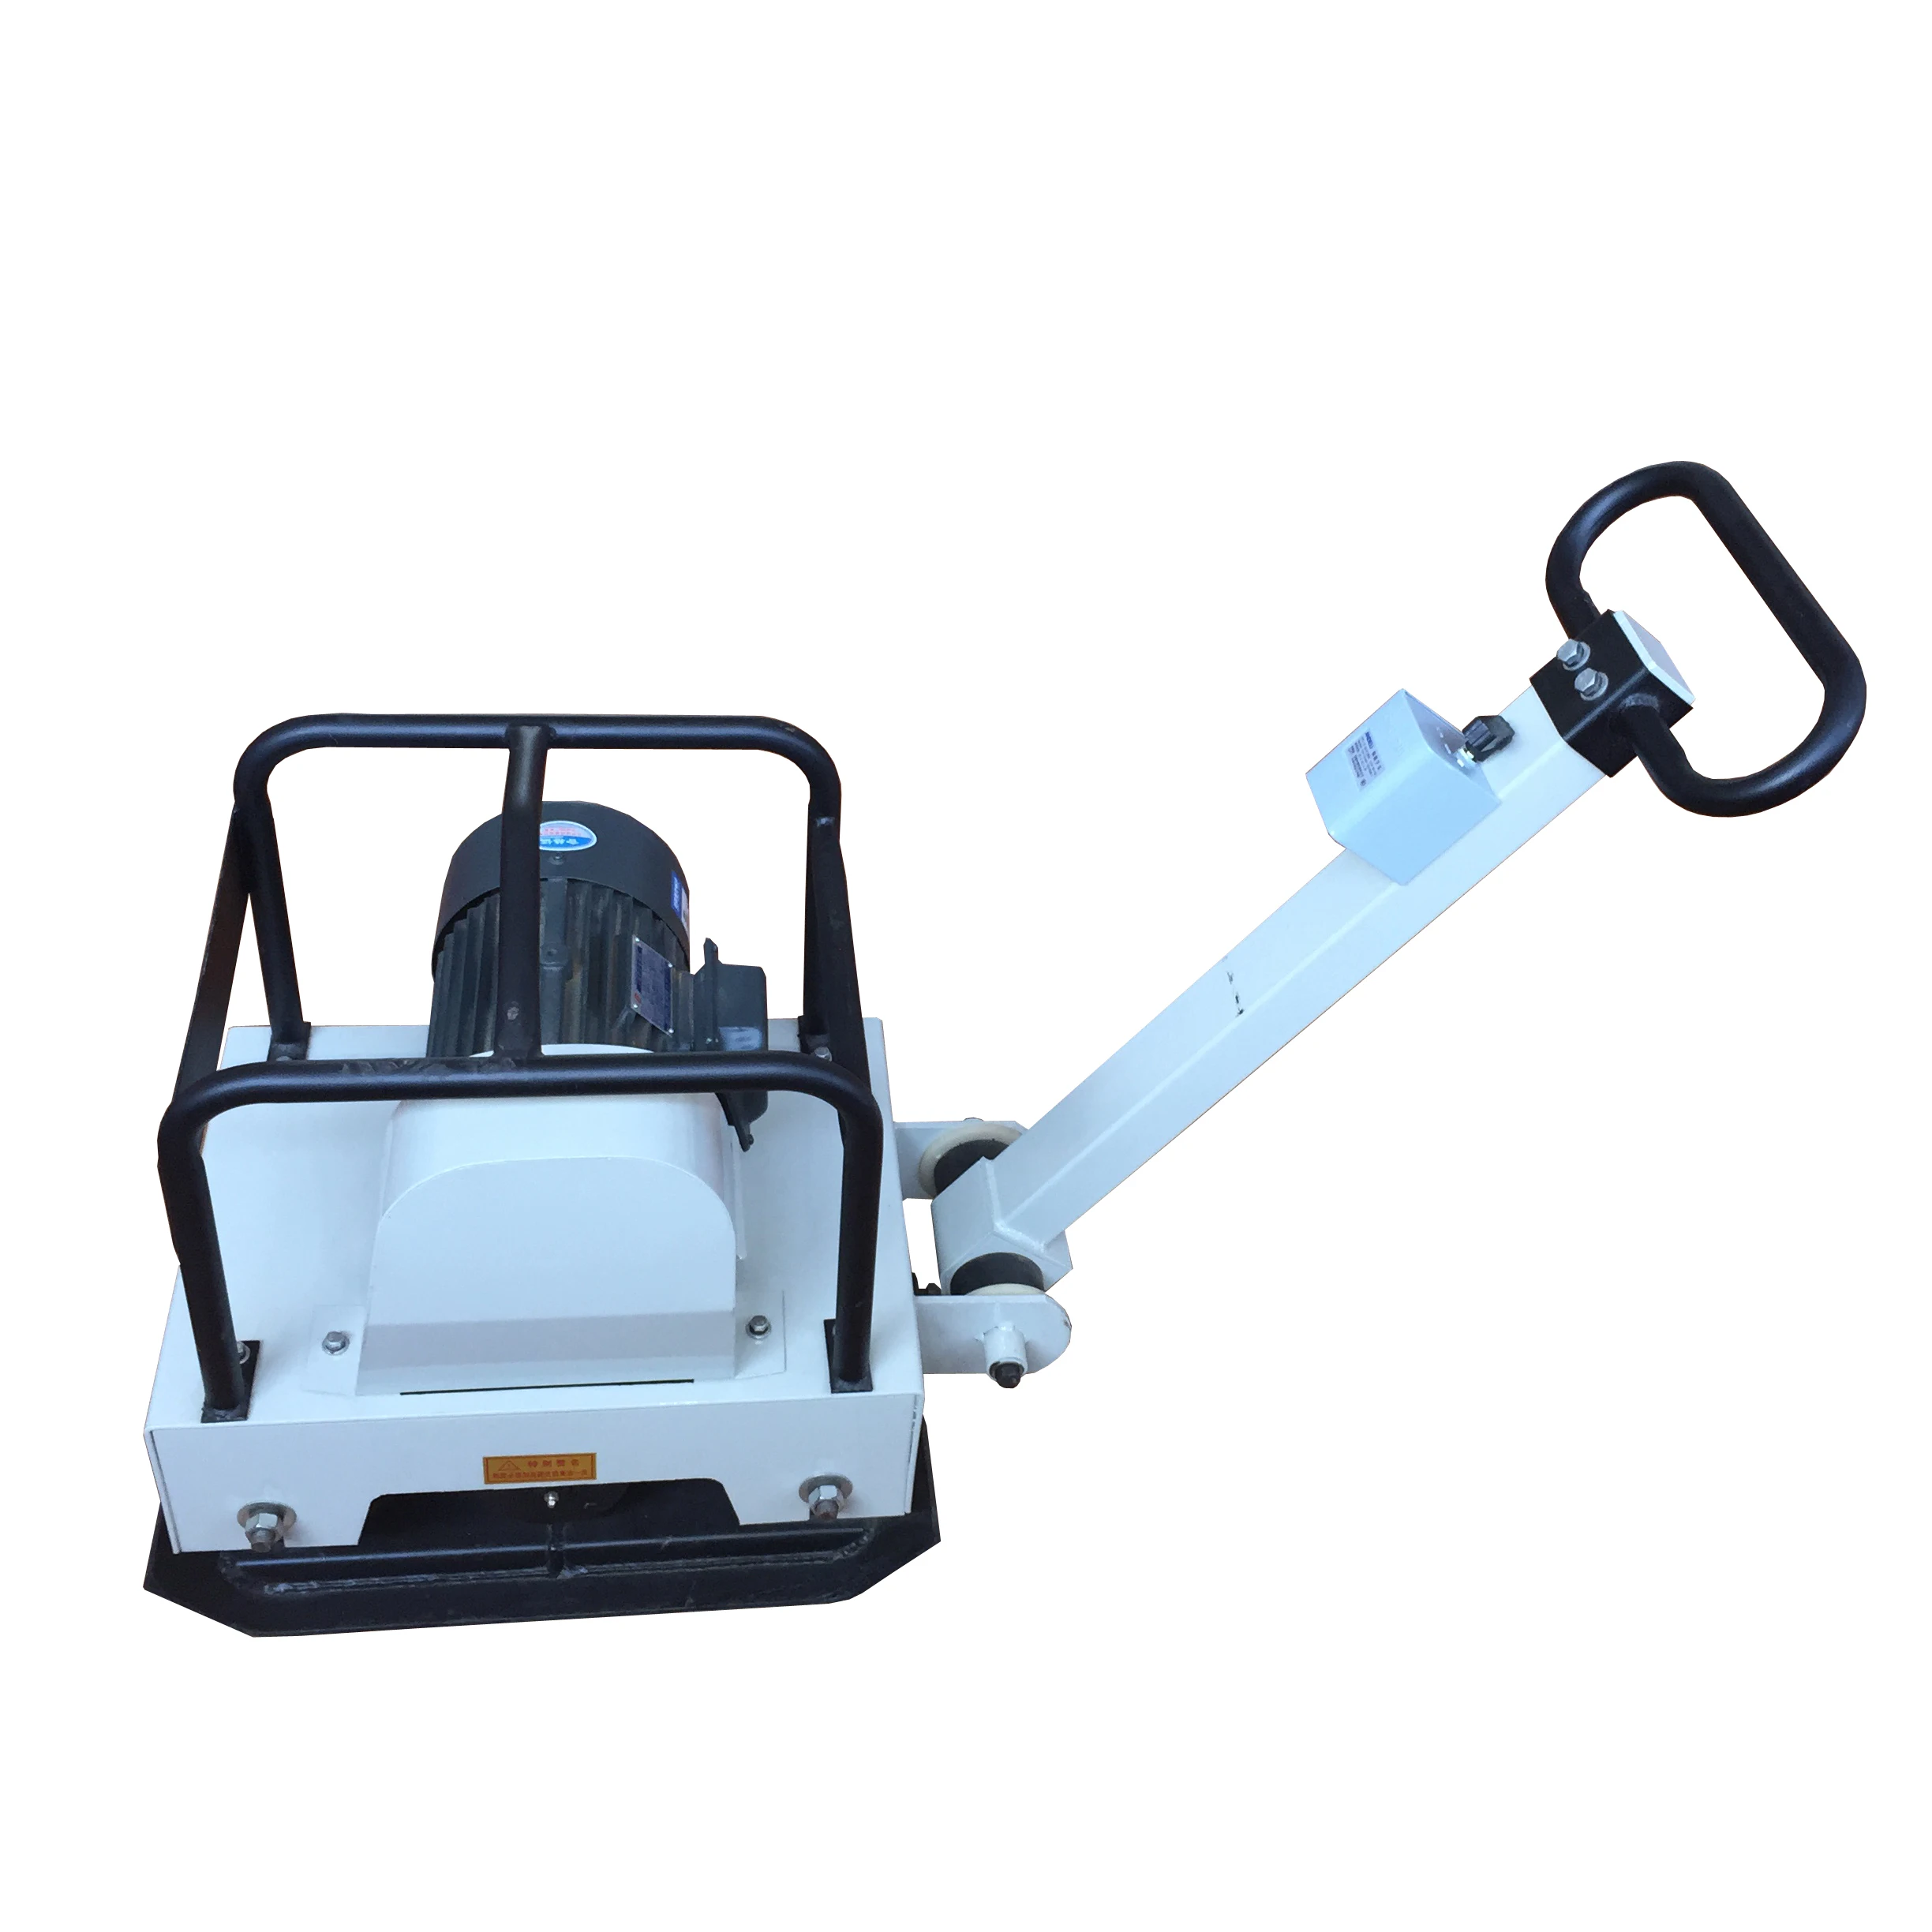 
price of electric engine hand push mini plate compactor concrete rammer  (62007375589)